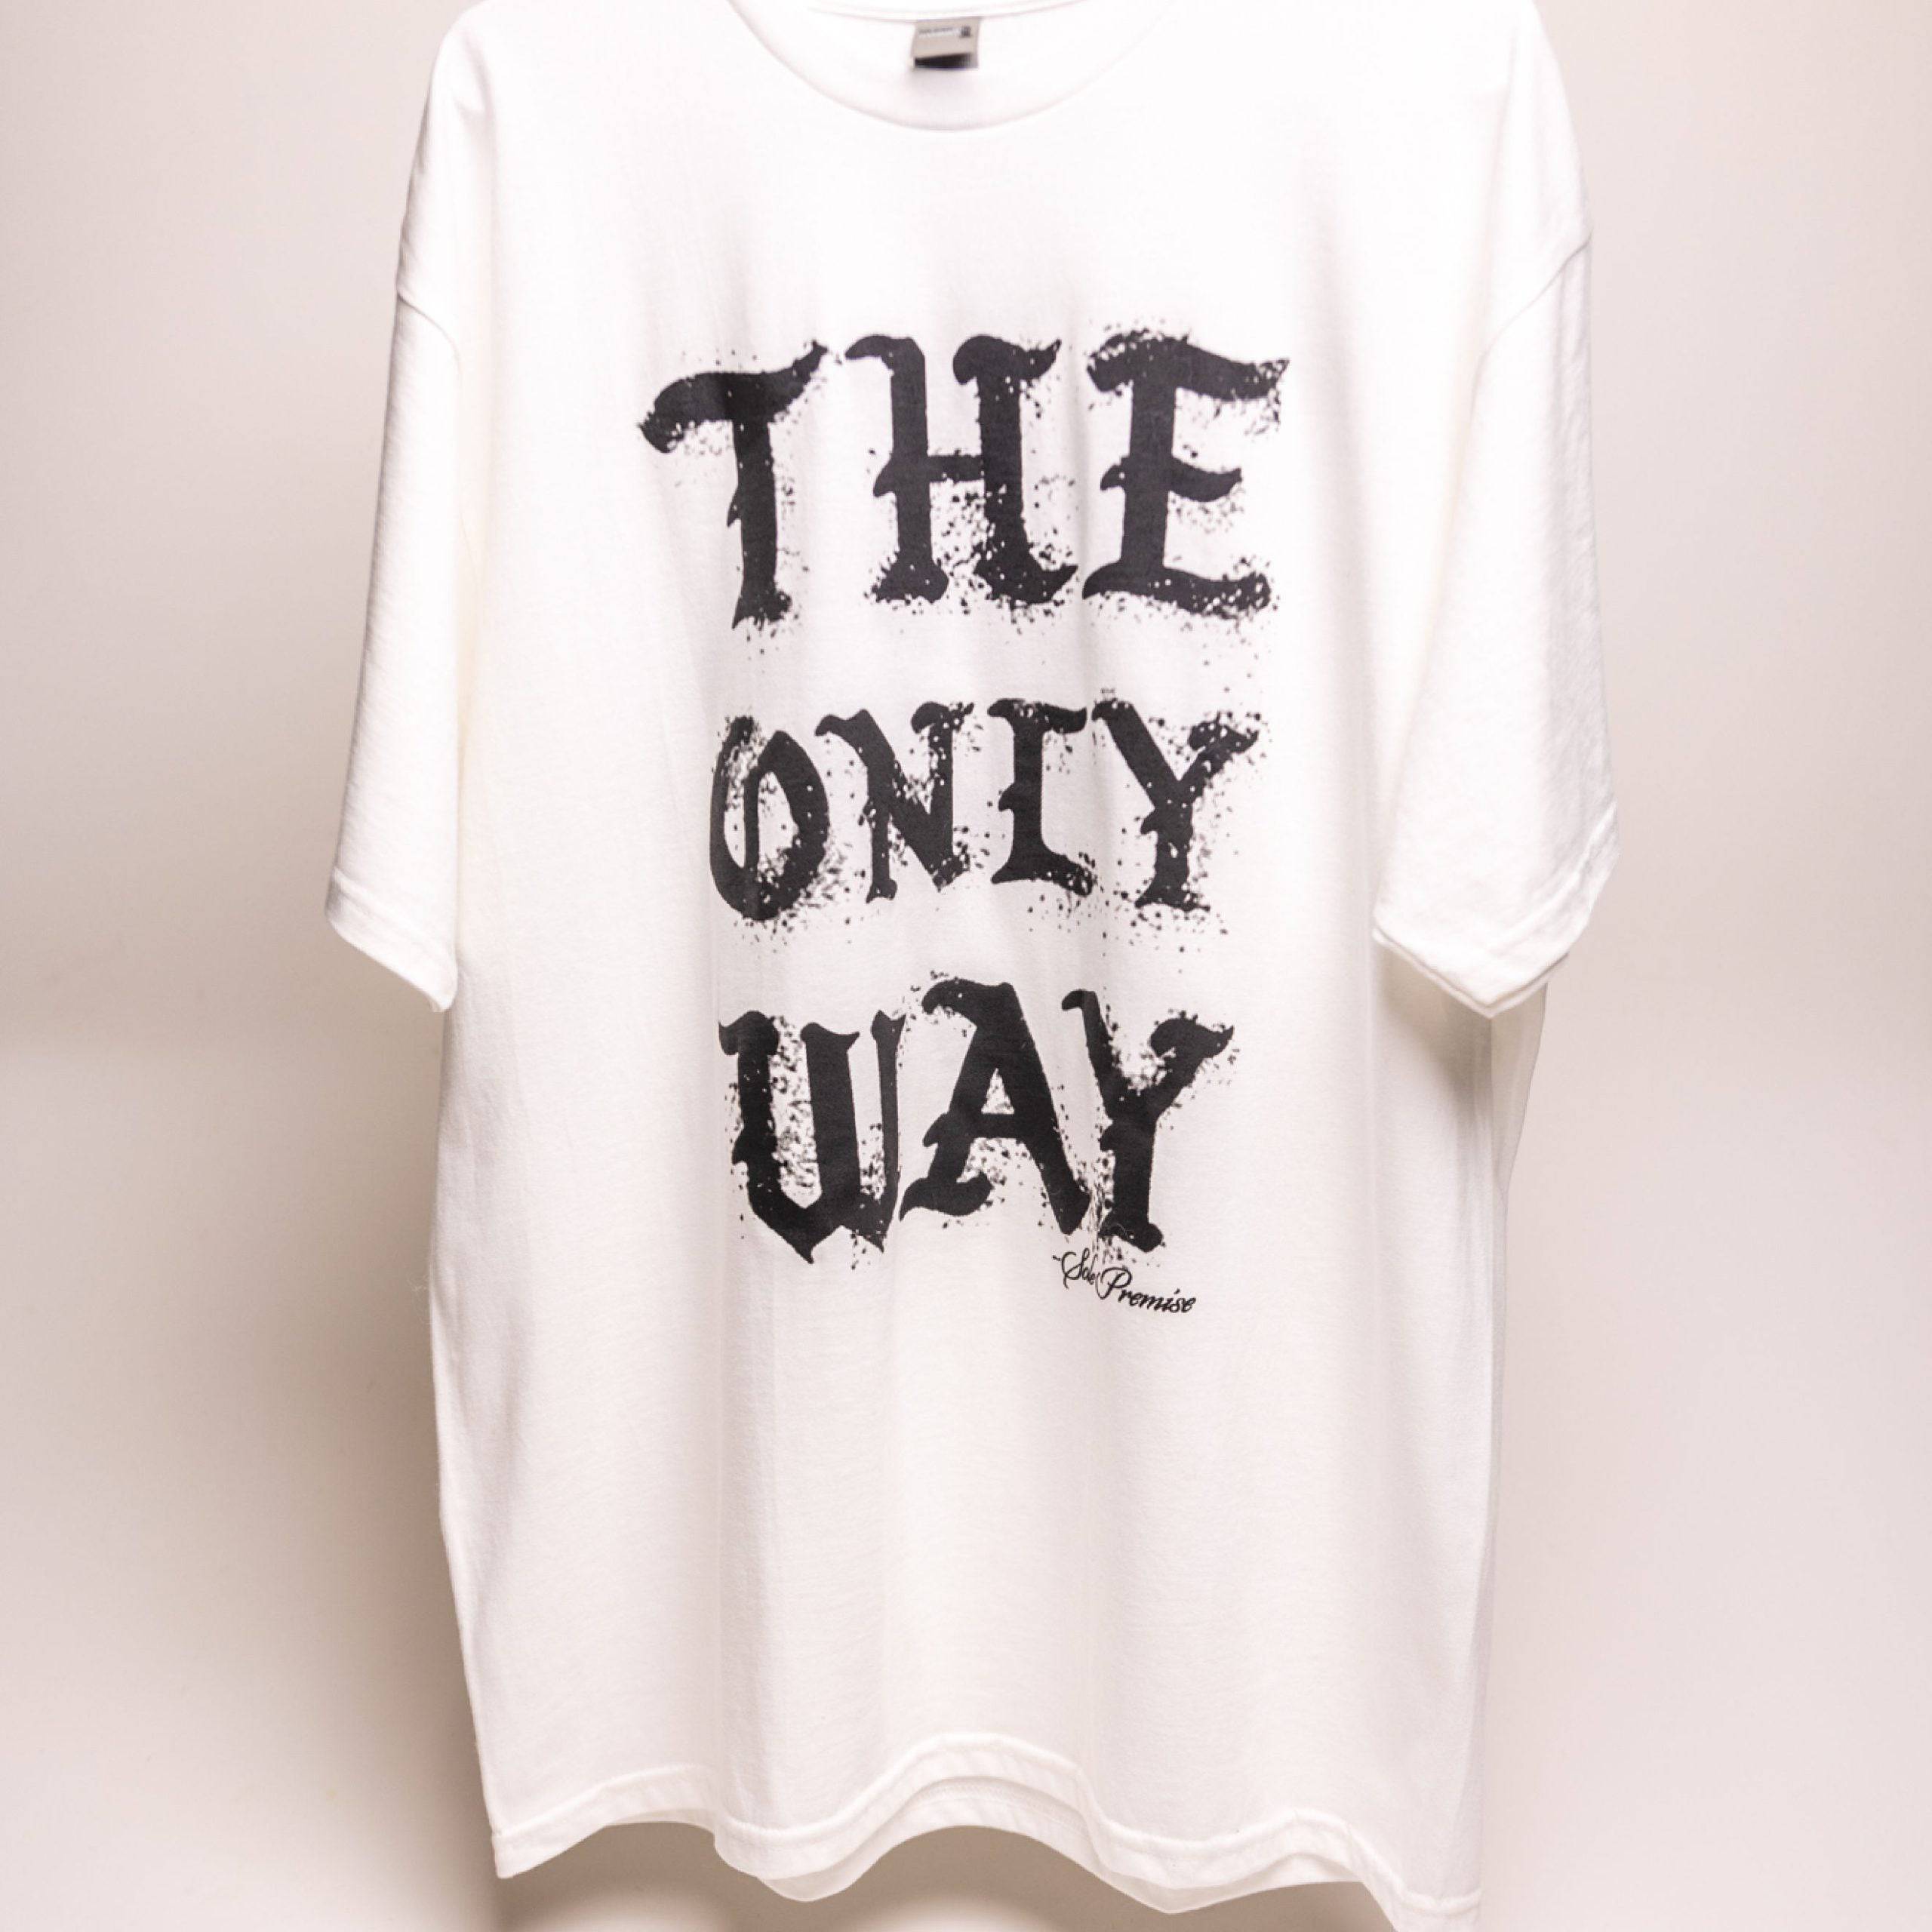 Only Way Shirt